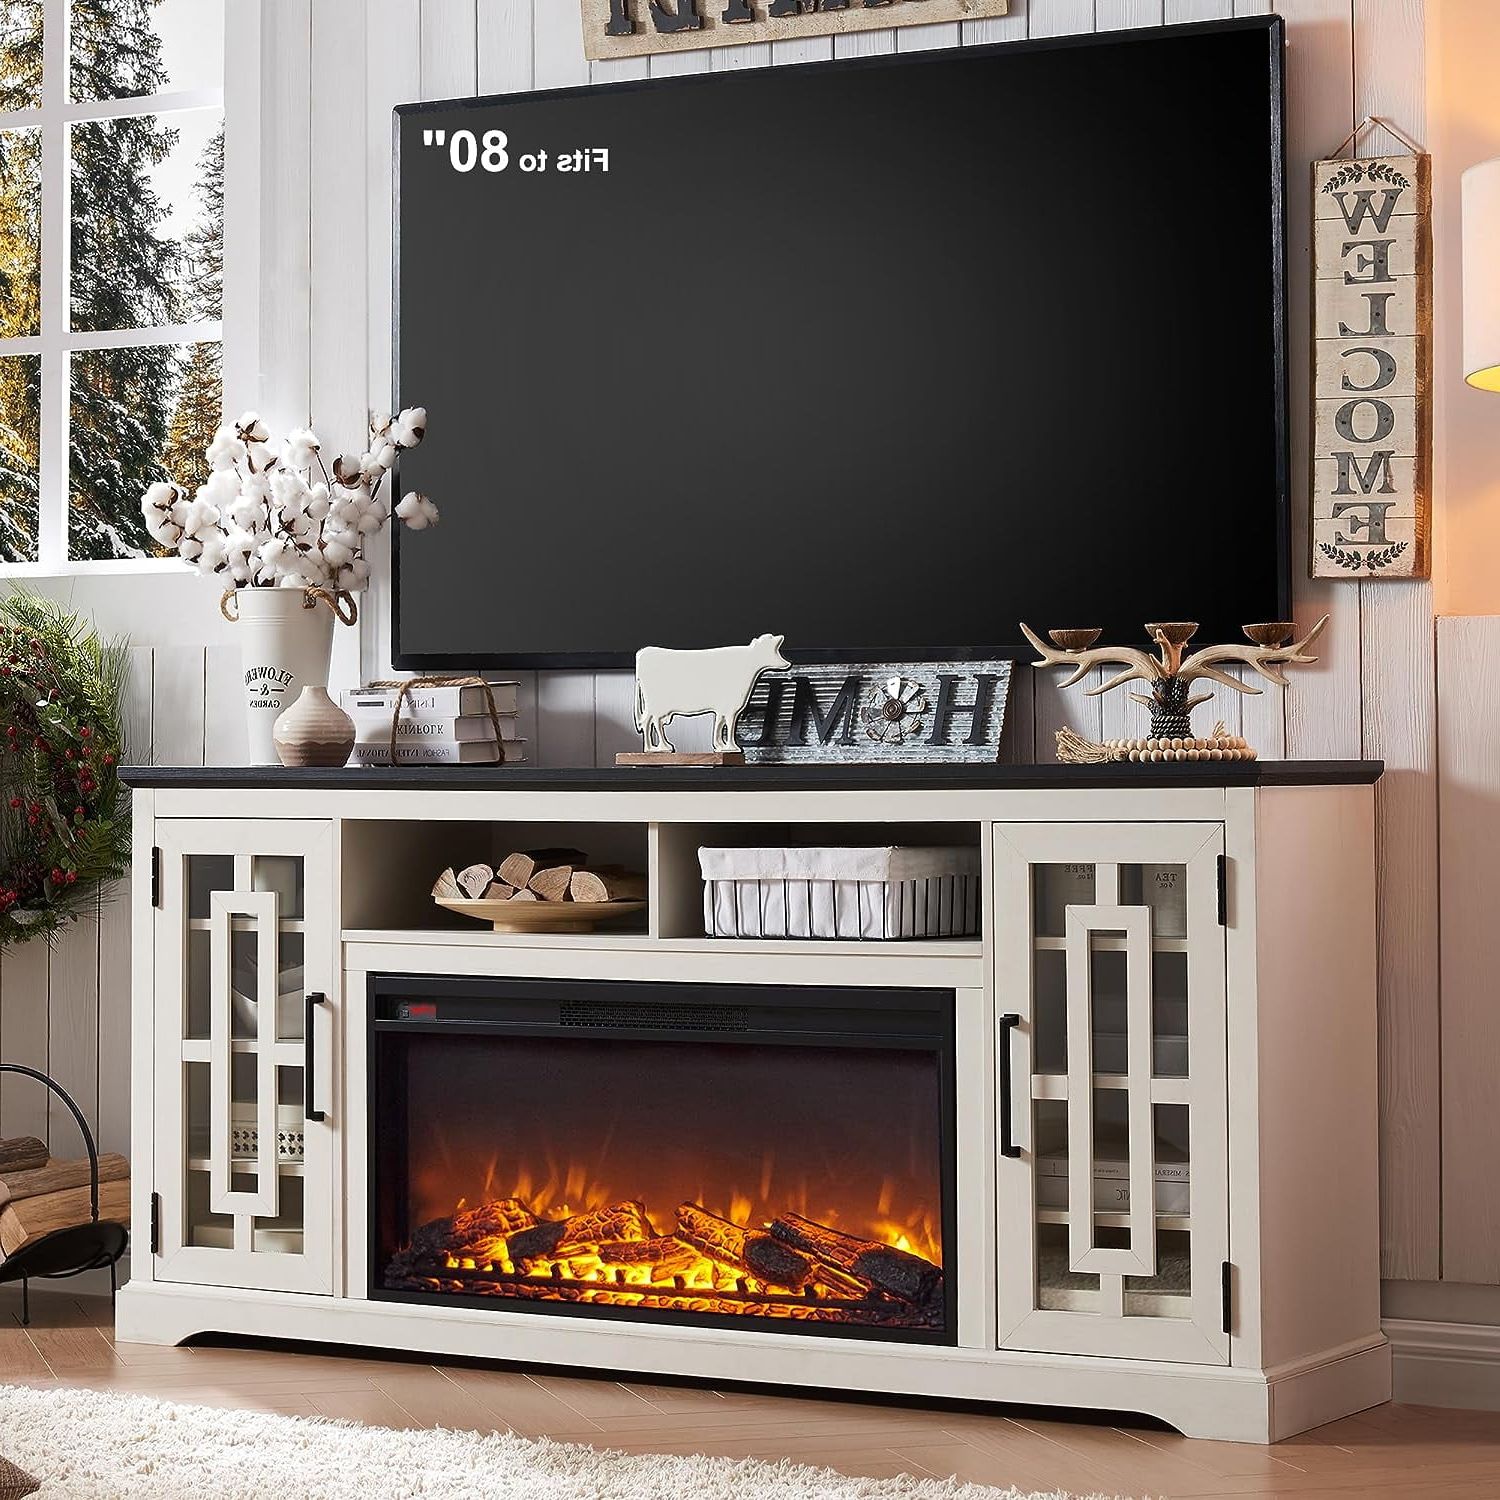 T4tream 70" Fireplace Tv Stand For 75 80 Inch Tv, Farmhouse Highboy  Entertainment Center With Storage For Living Room, White – Walmart Inside Wood Highboy Fireplace Tv Stands (View 3 of 20)